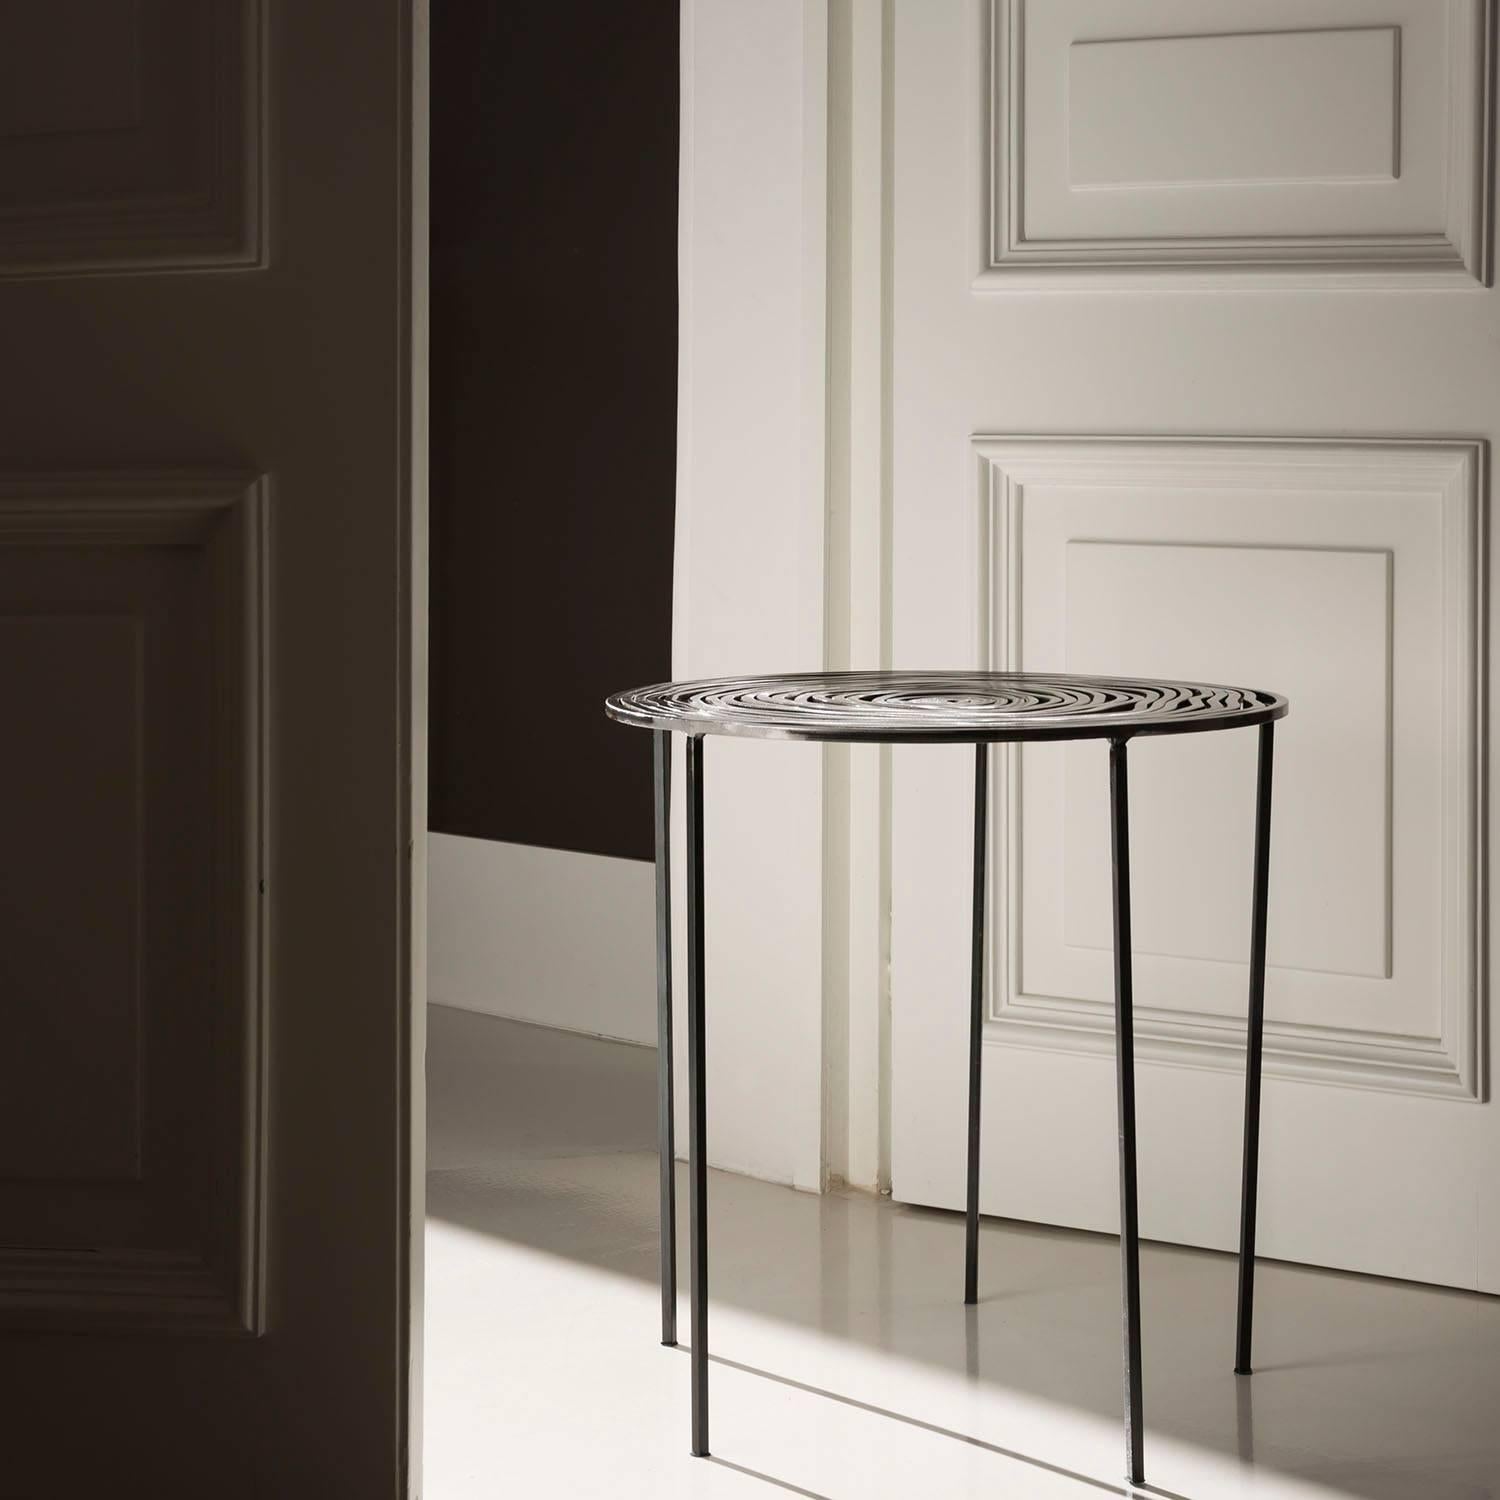 Eclipse line by Piazzadispagna9 design studio presented in 2017 Maison & Objet in Paris. Side table in iron handmade in Italy.